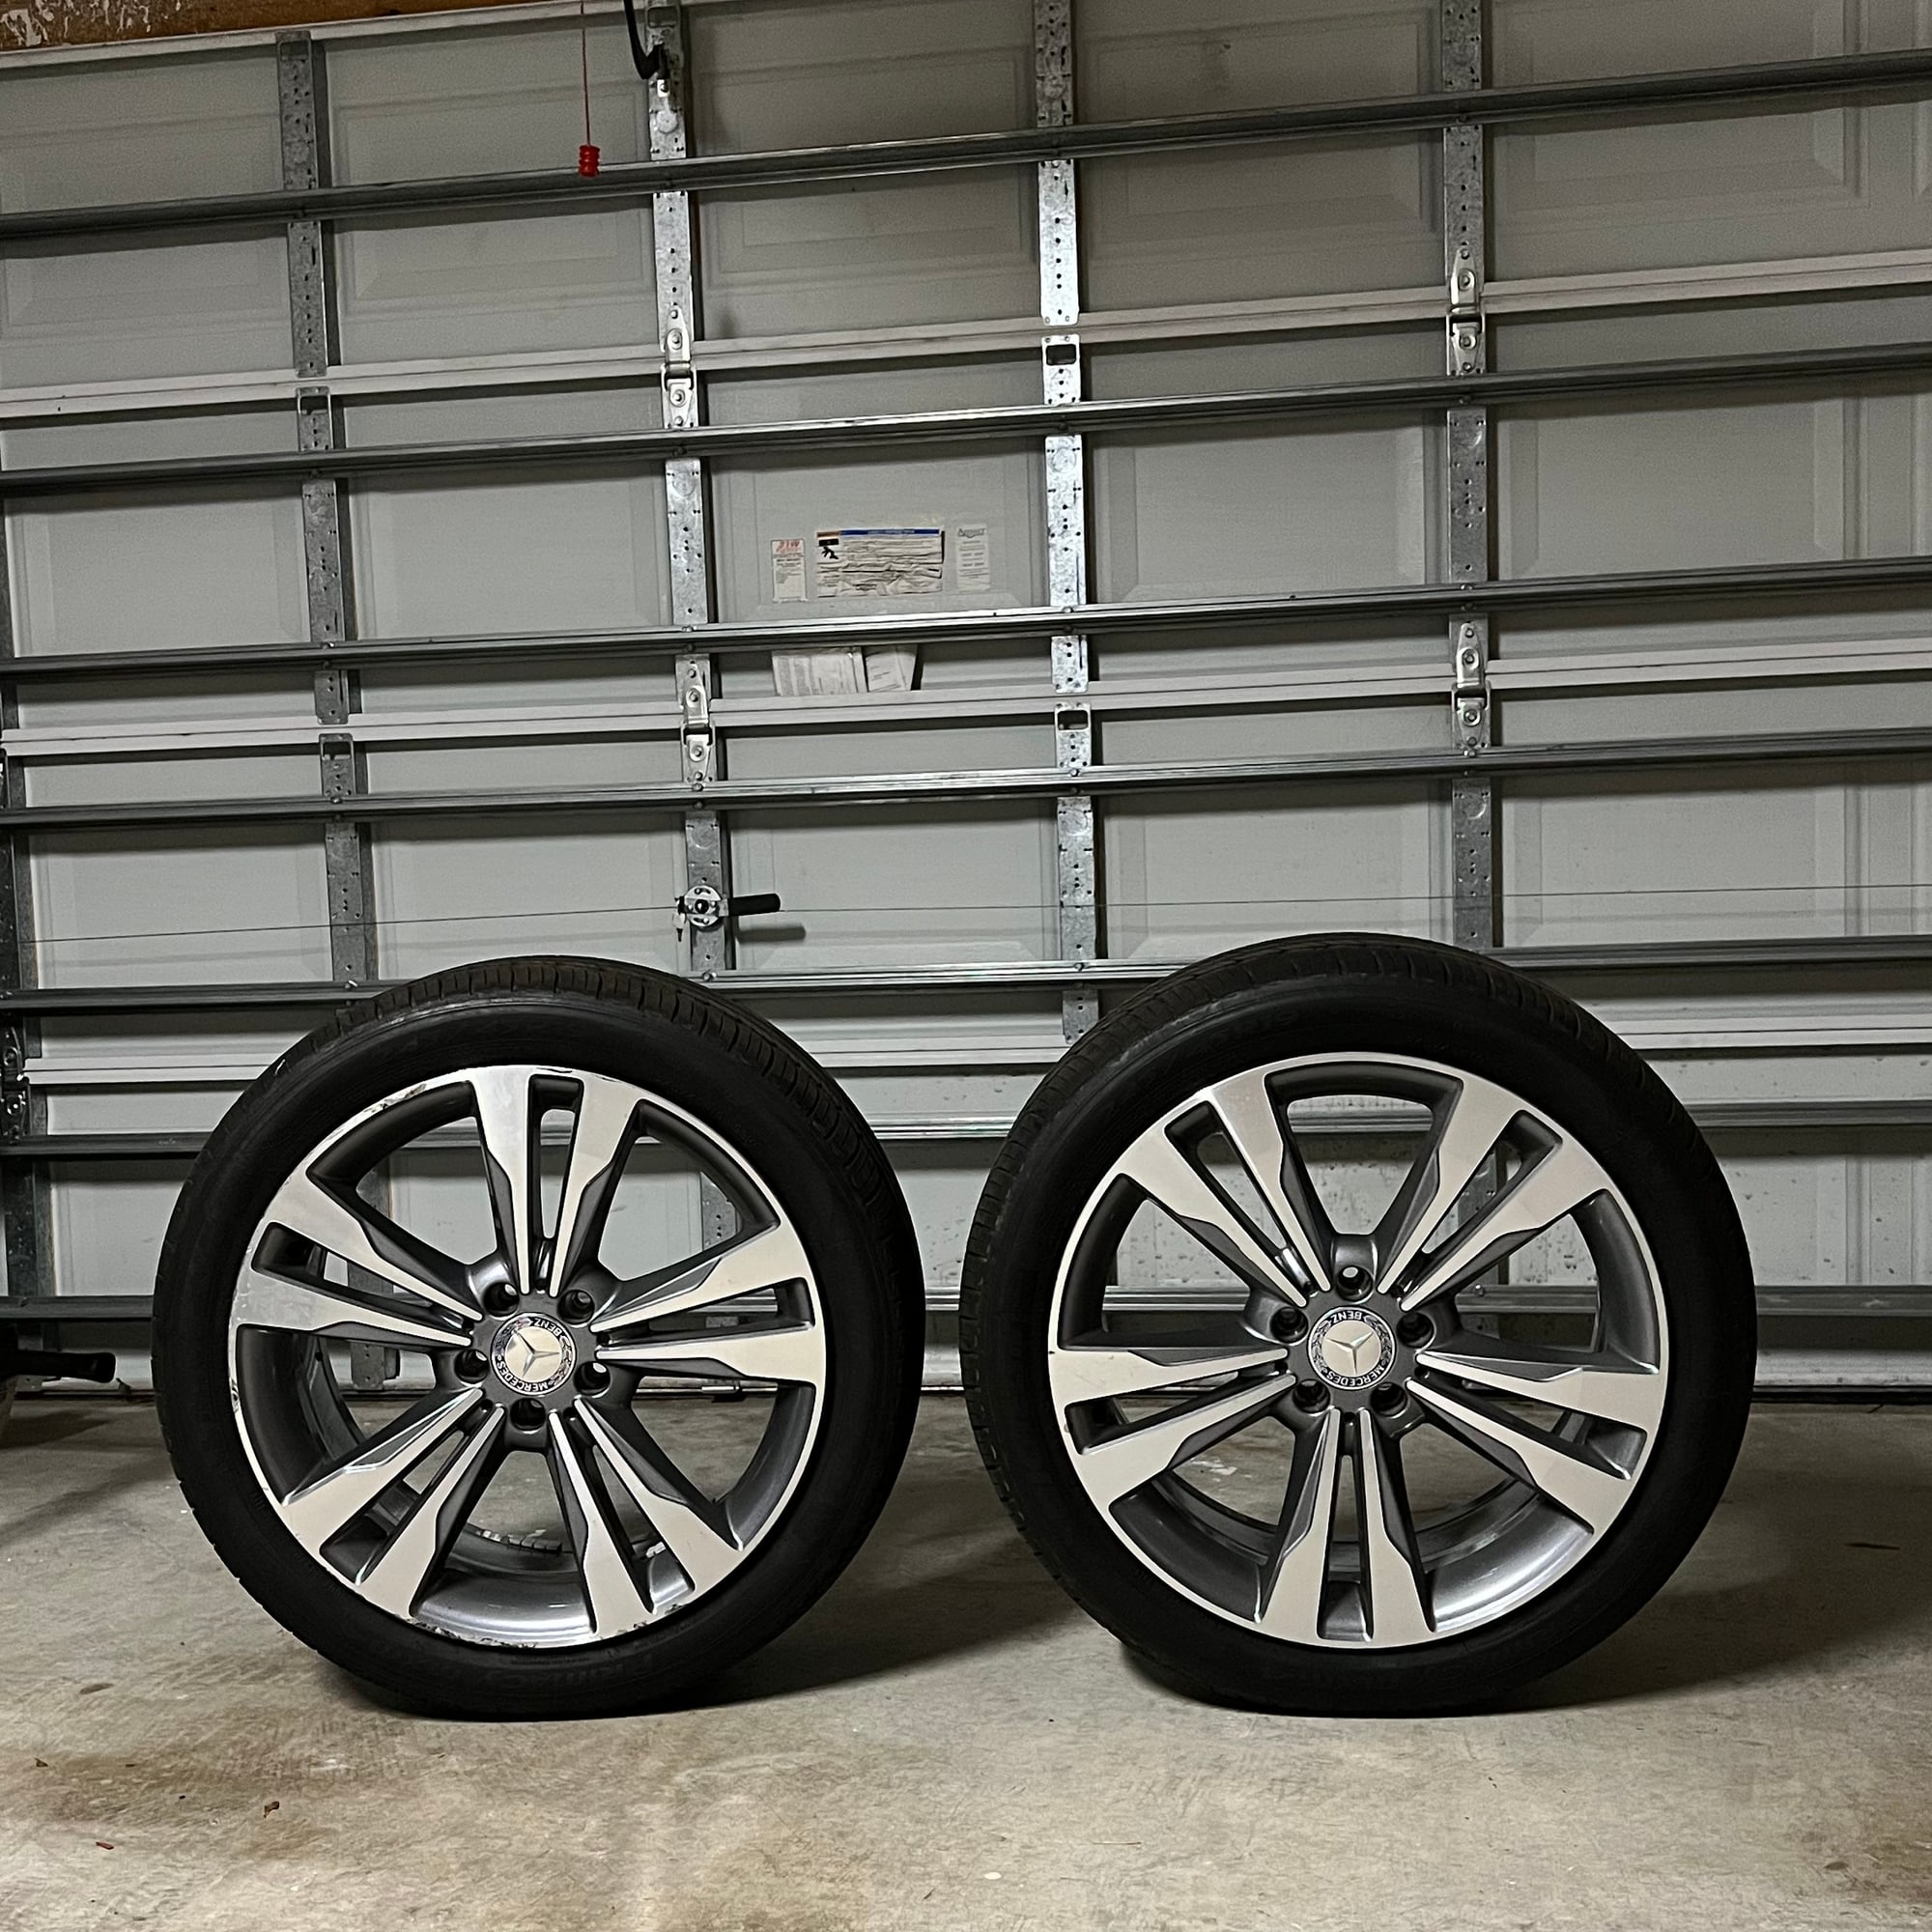 Wheels and Tires/Axles - 19” Factory Mercedes S550 Rims - Used - 2014 to 2018 Mercedes-Benz S550 - Jacksonville, FL 32218, United States